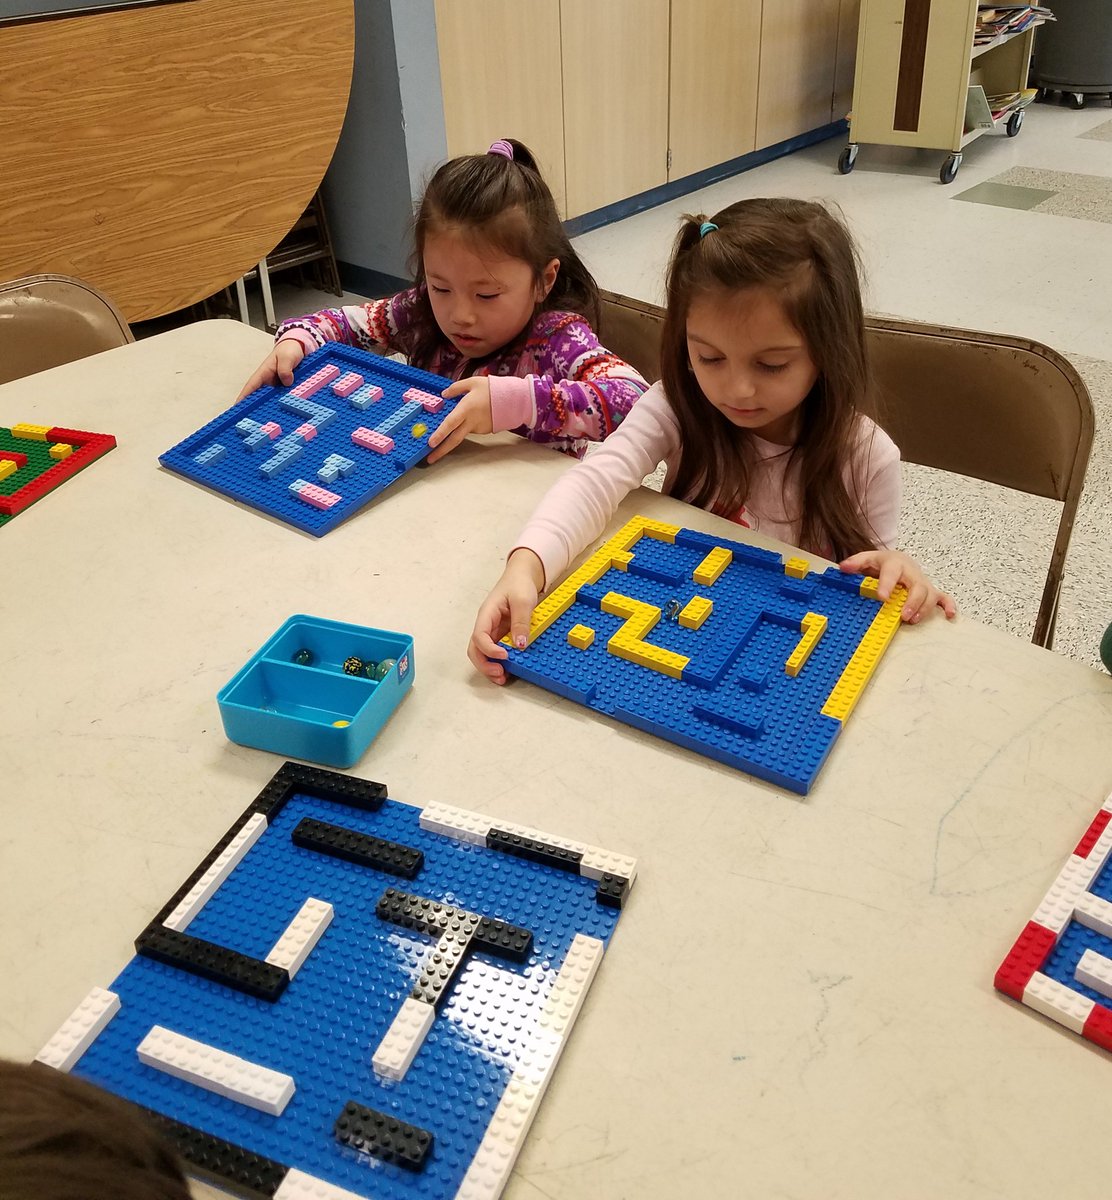 We can move marbles in the Lego Mazes. Awesome! @GrundyAve @SachemSchools 
#steamactivities